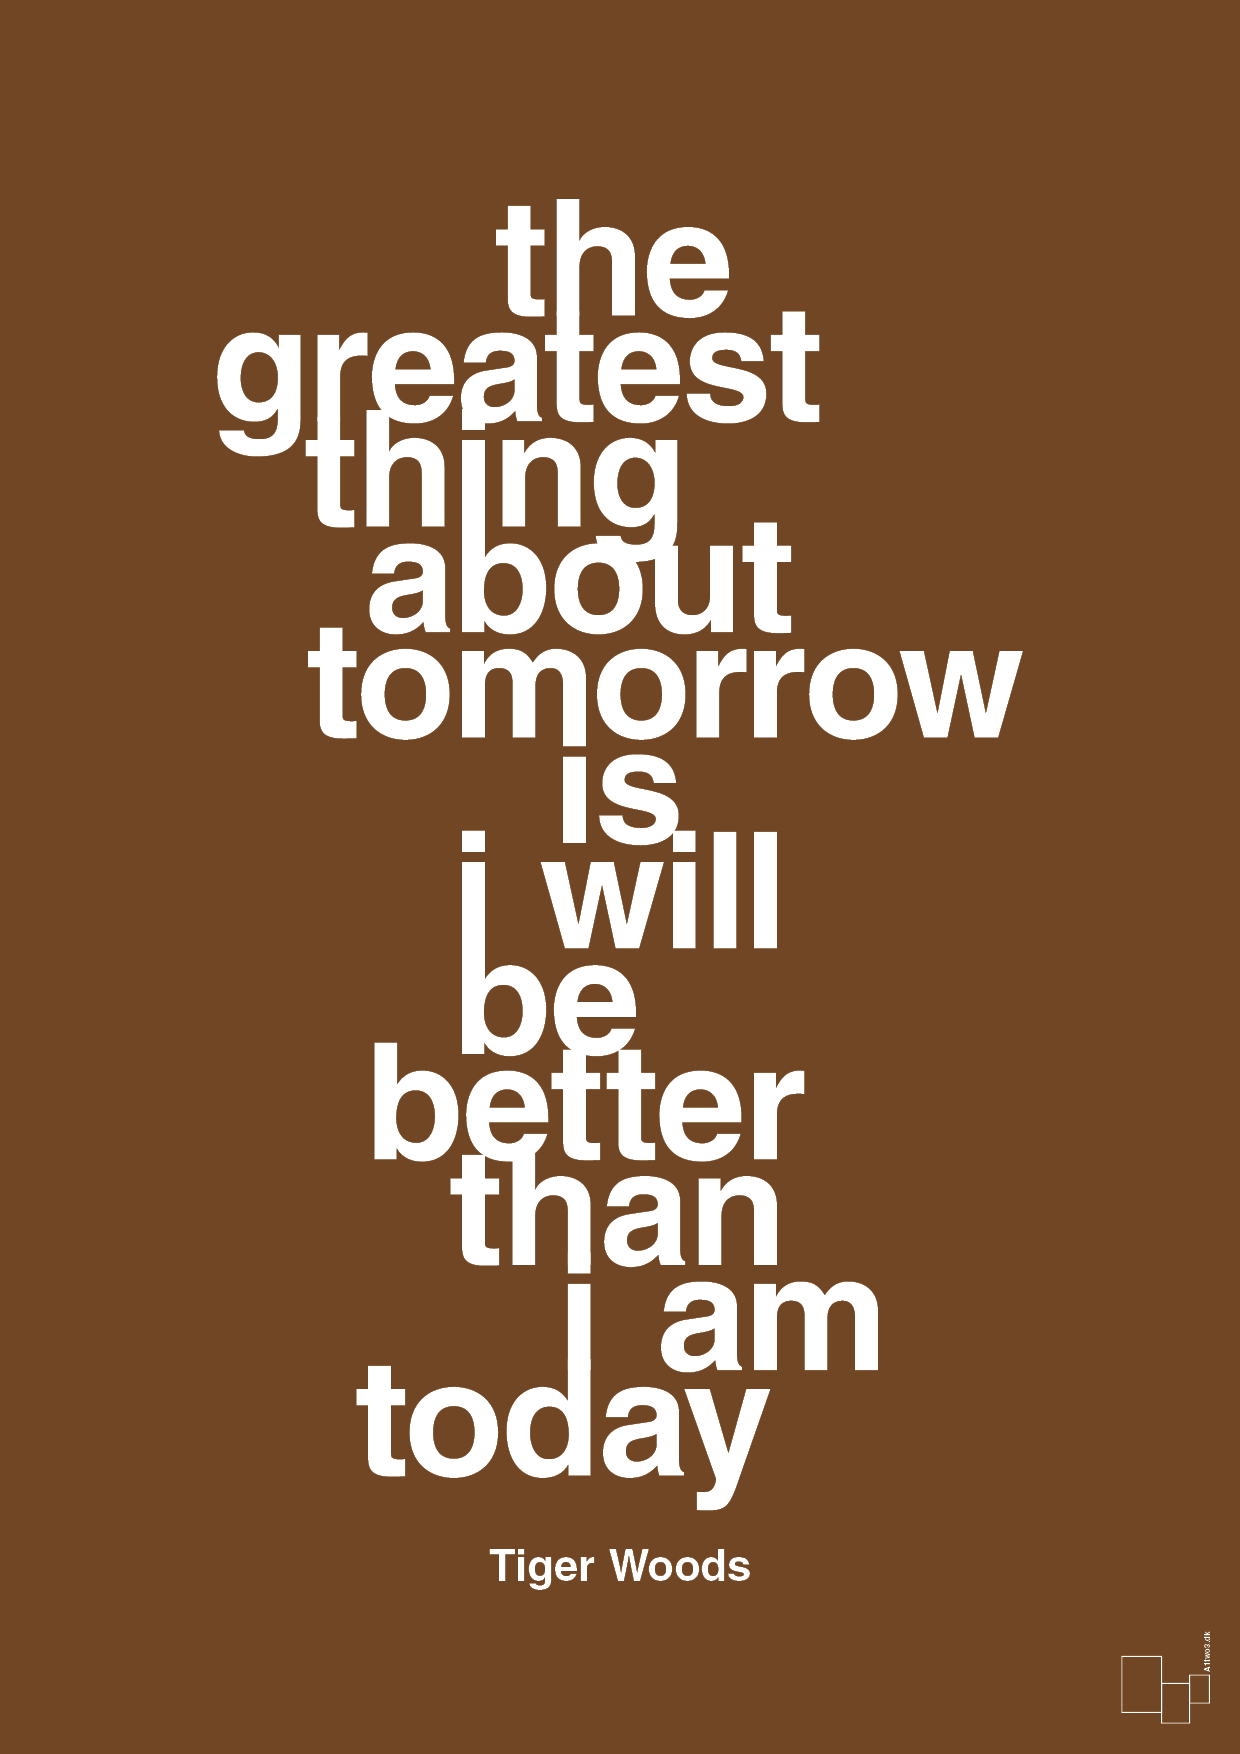 the greatest thing about tomorrow is i will be better than i am today - Plakat med Citater i Dark Brown